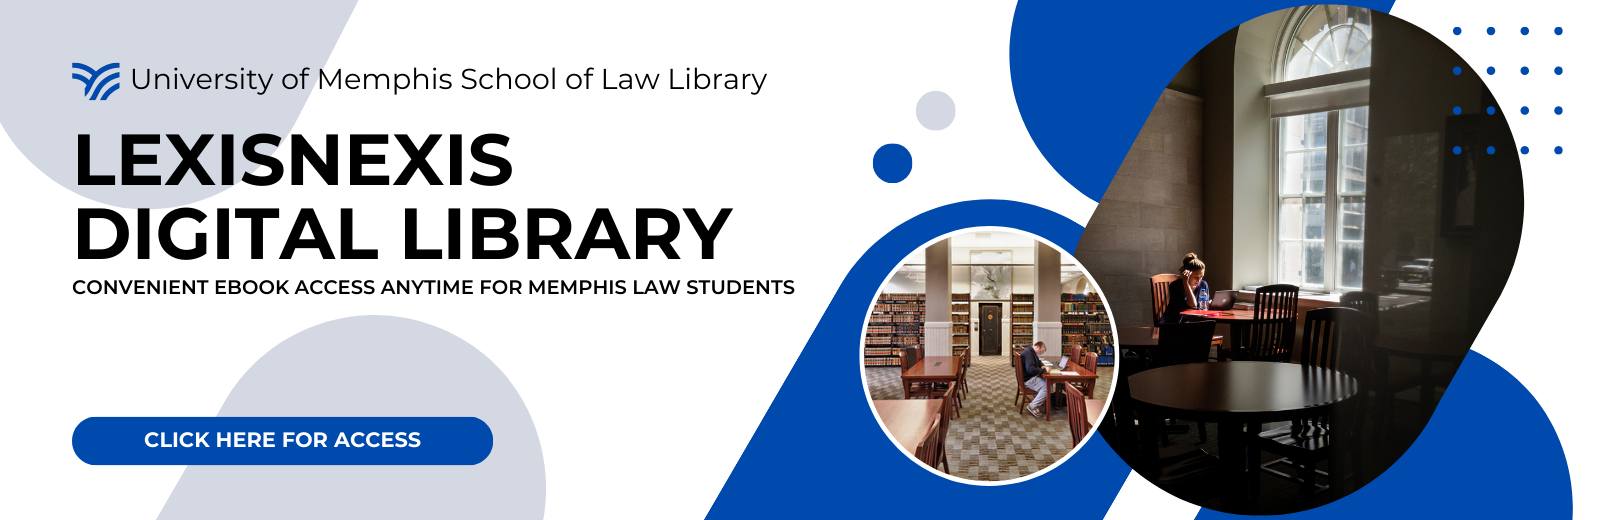 University of Memphis School of Law Library. Lexis Nexus Digital Library. Convenient eBook Access Anytime for Memphis Law Students. Click here for access